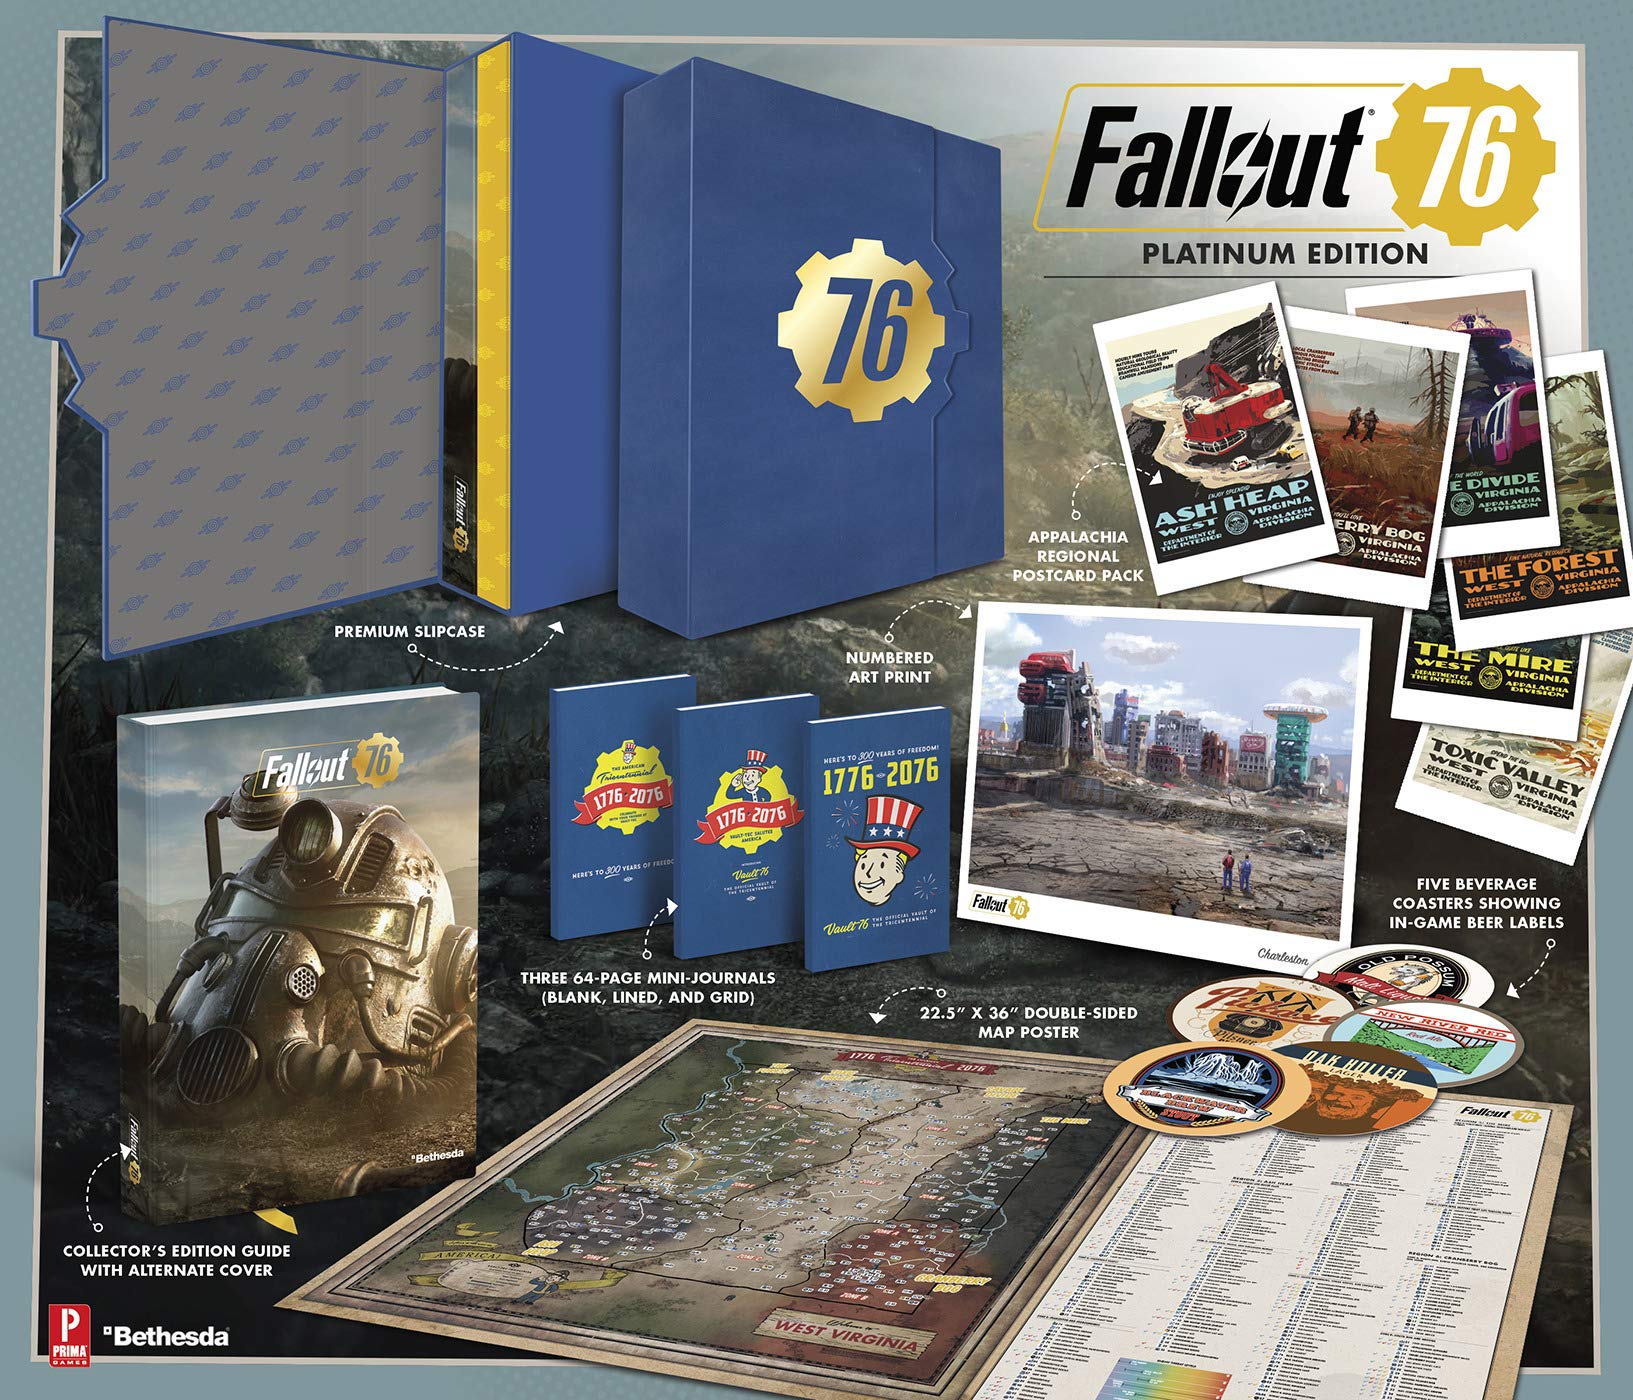 Fallout 76 Strategy Guide: Which Edition to Buy?